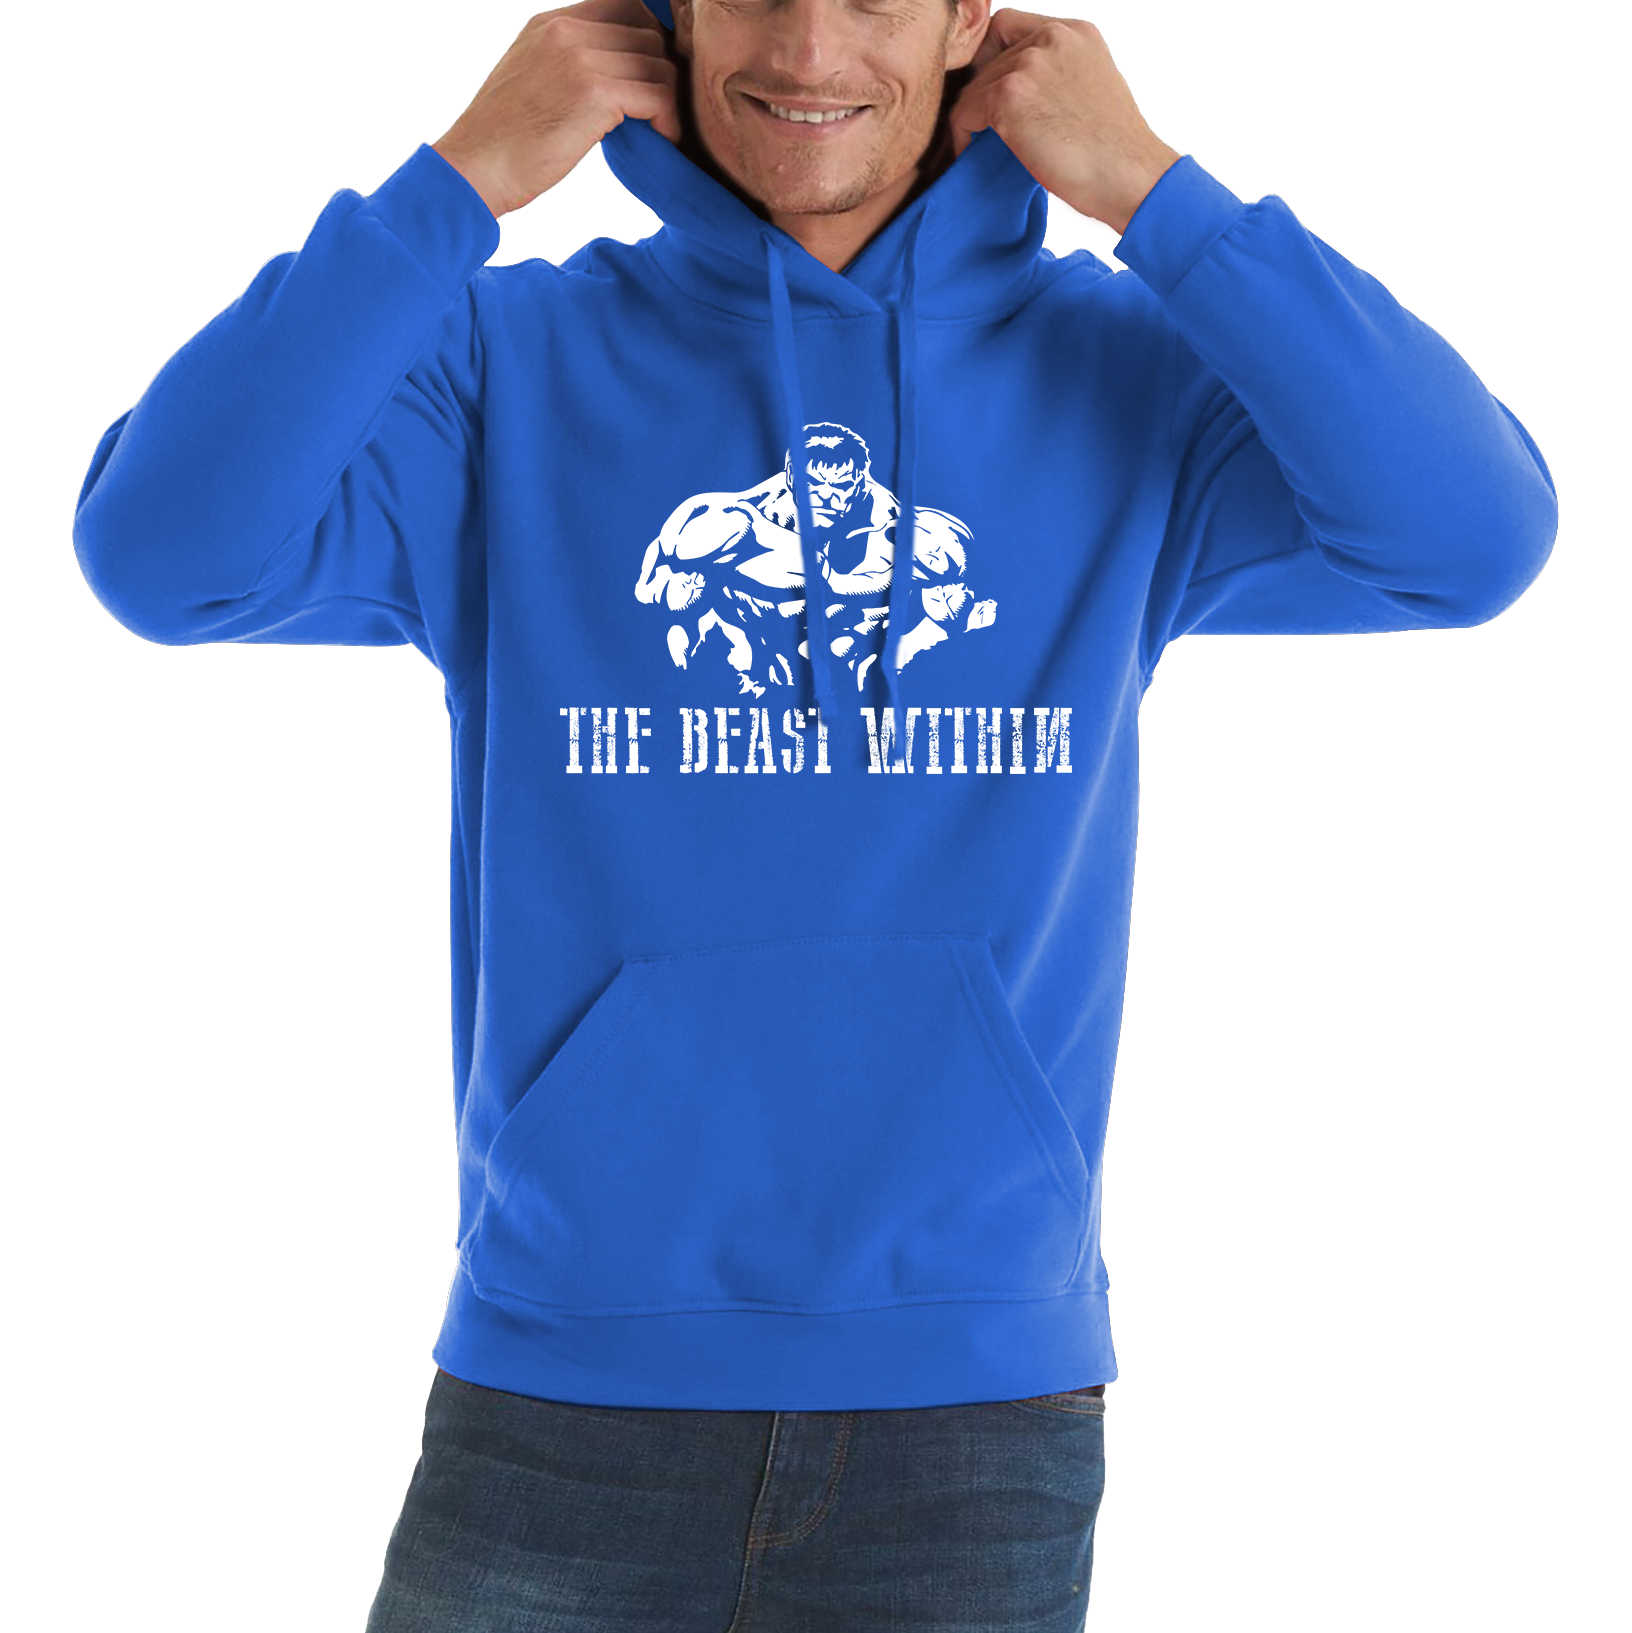 The Beast Within Hulk Bodybuilding Gym Workout Fitness Gym Training Adult Hoodie